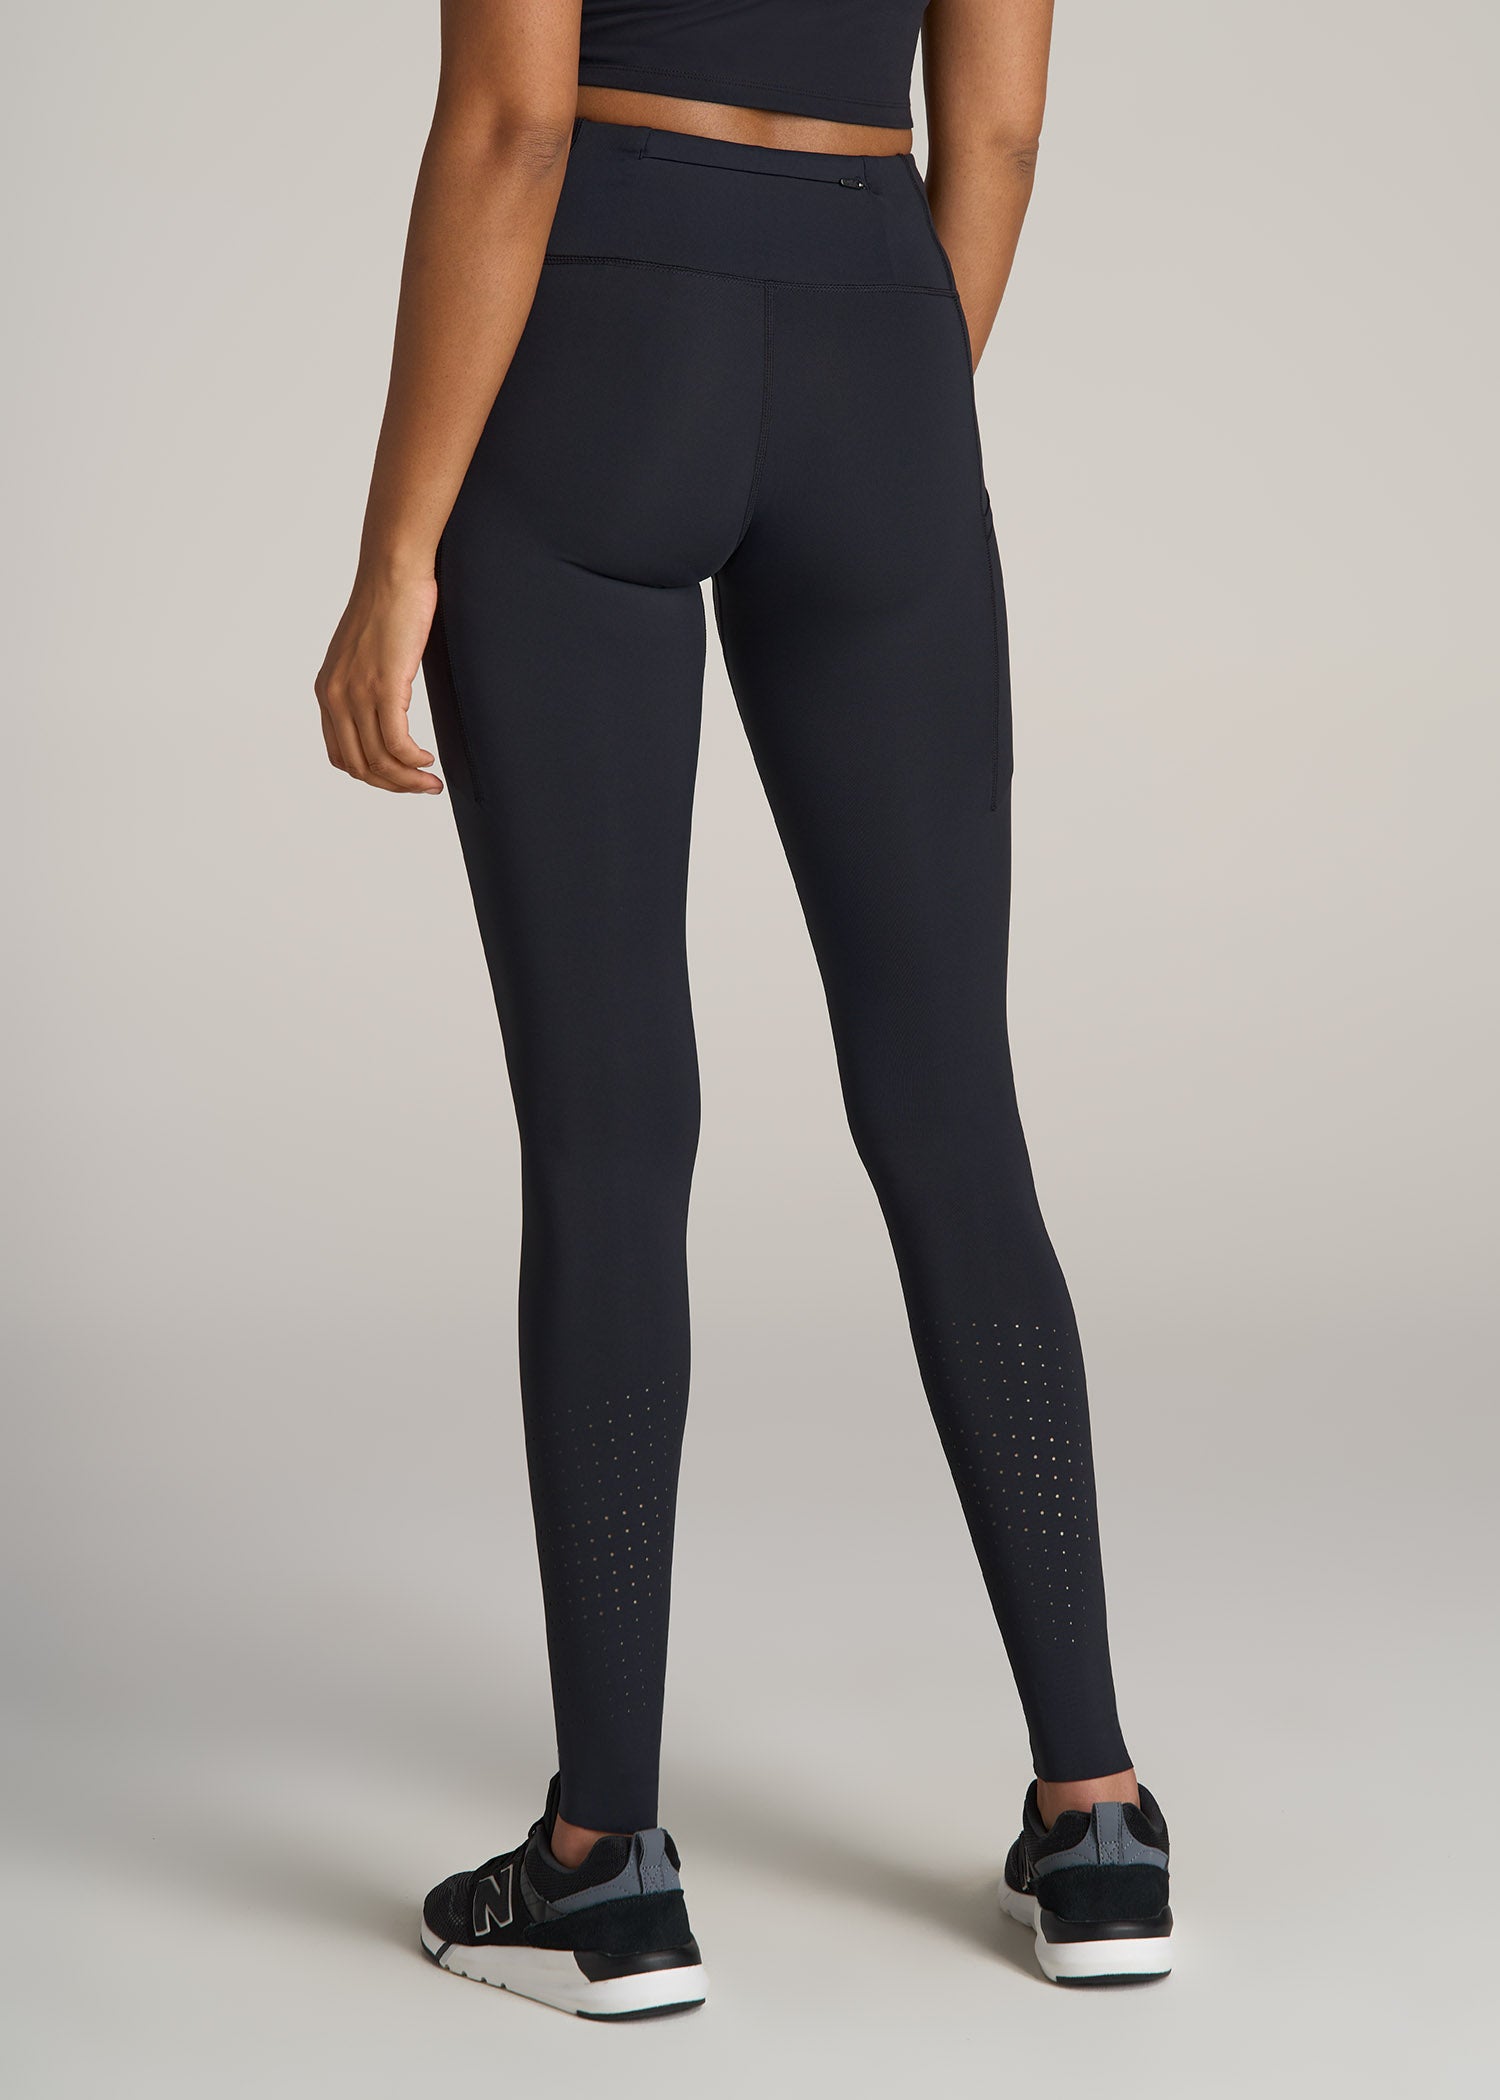 These tall shapewear leggings from Alloy Apparel will smooth and firm even  the longest of legs! See my review at… | Shapewear, Tall clothing, Fashion  clothes women